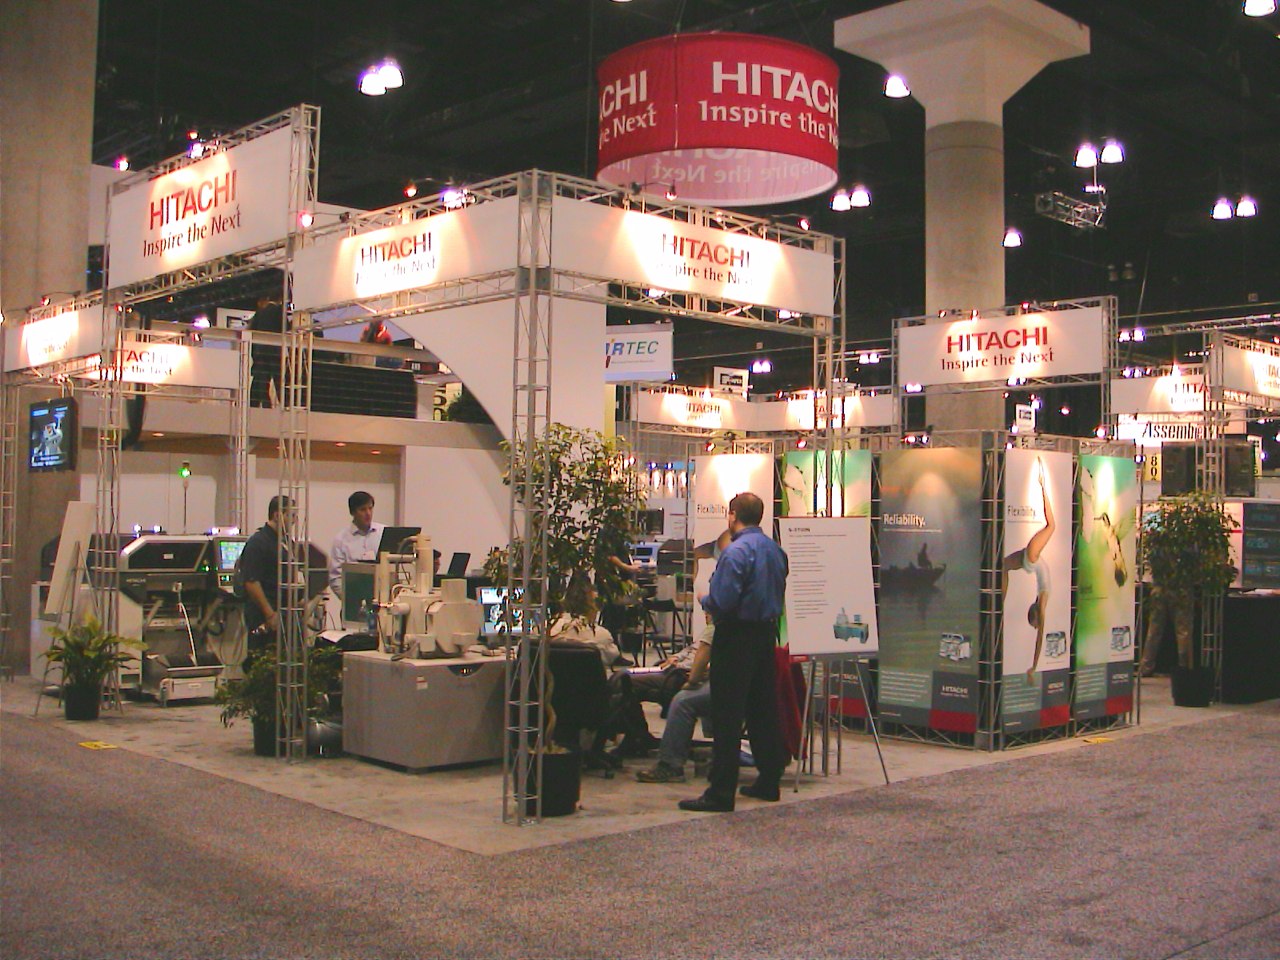 Truss in a trade show exhibit design that focuses on the graphic message